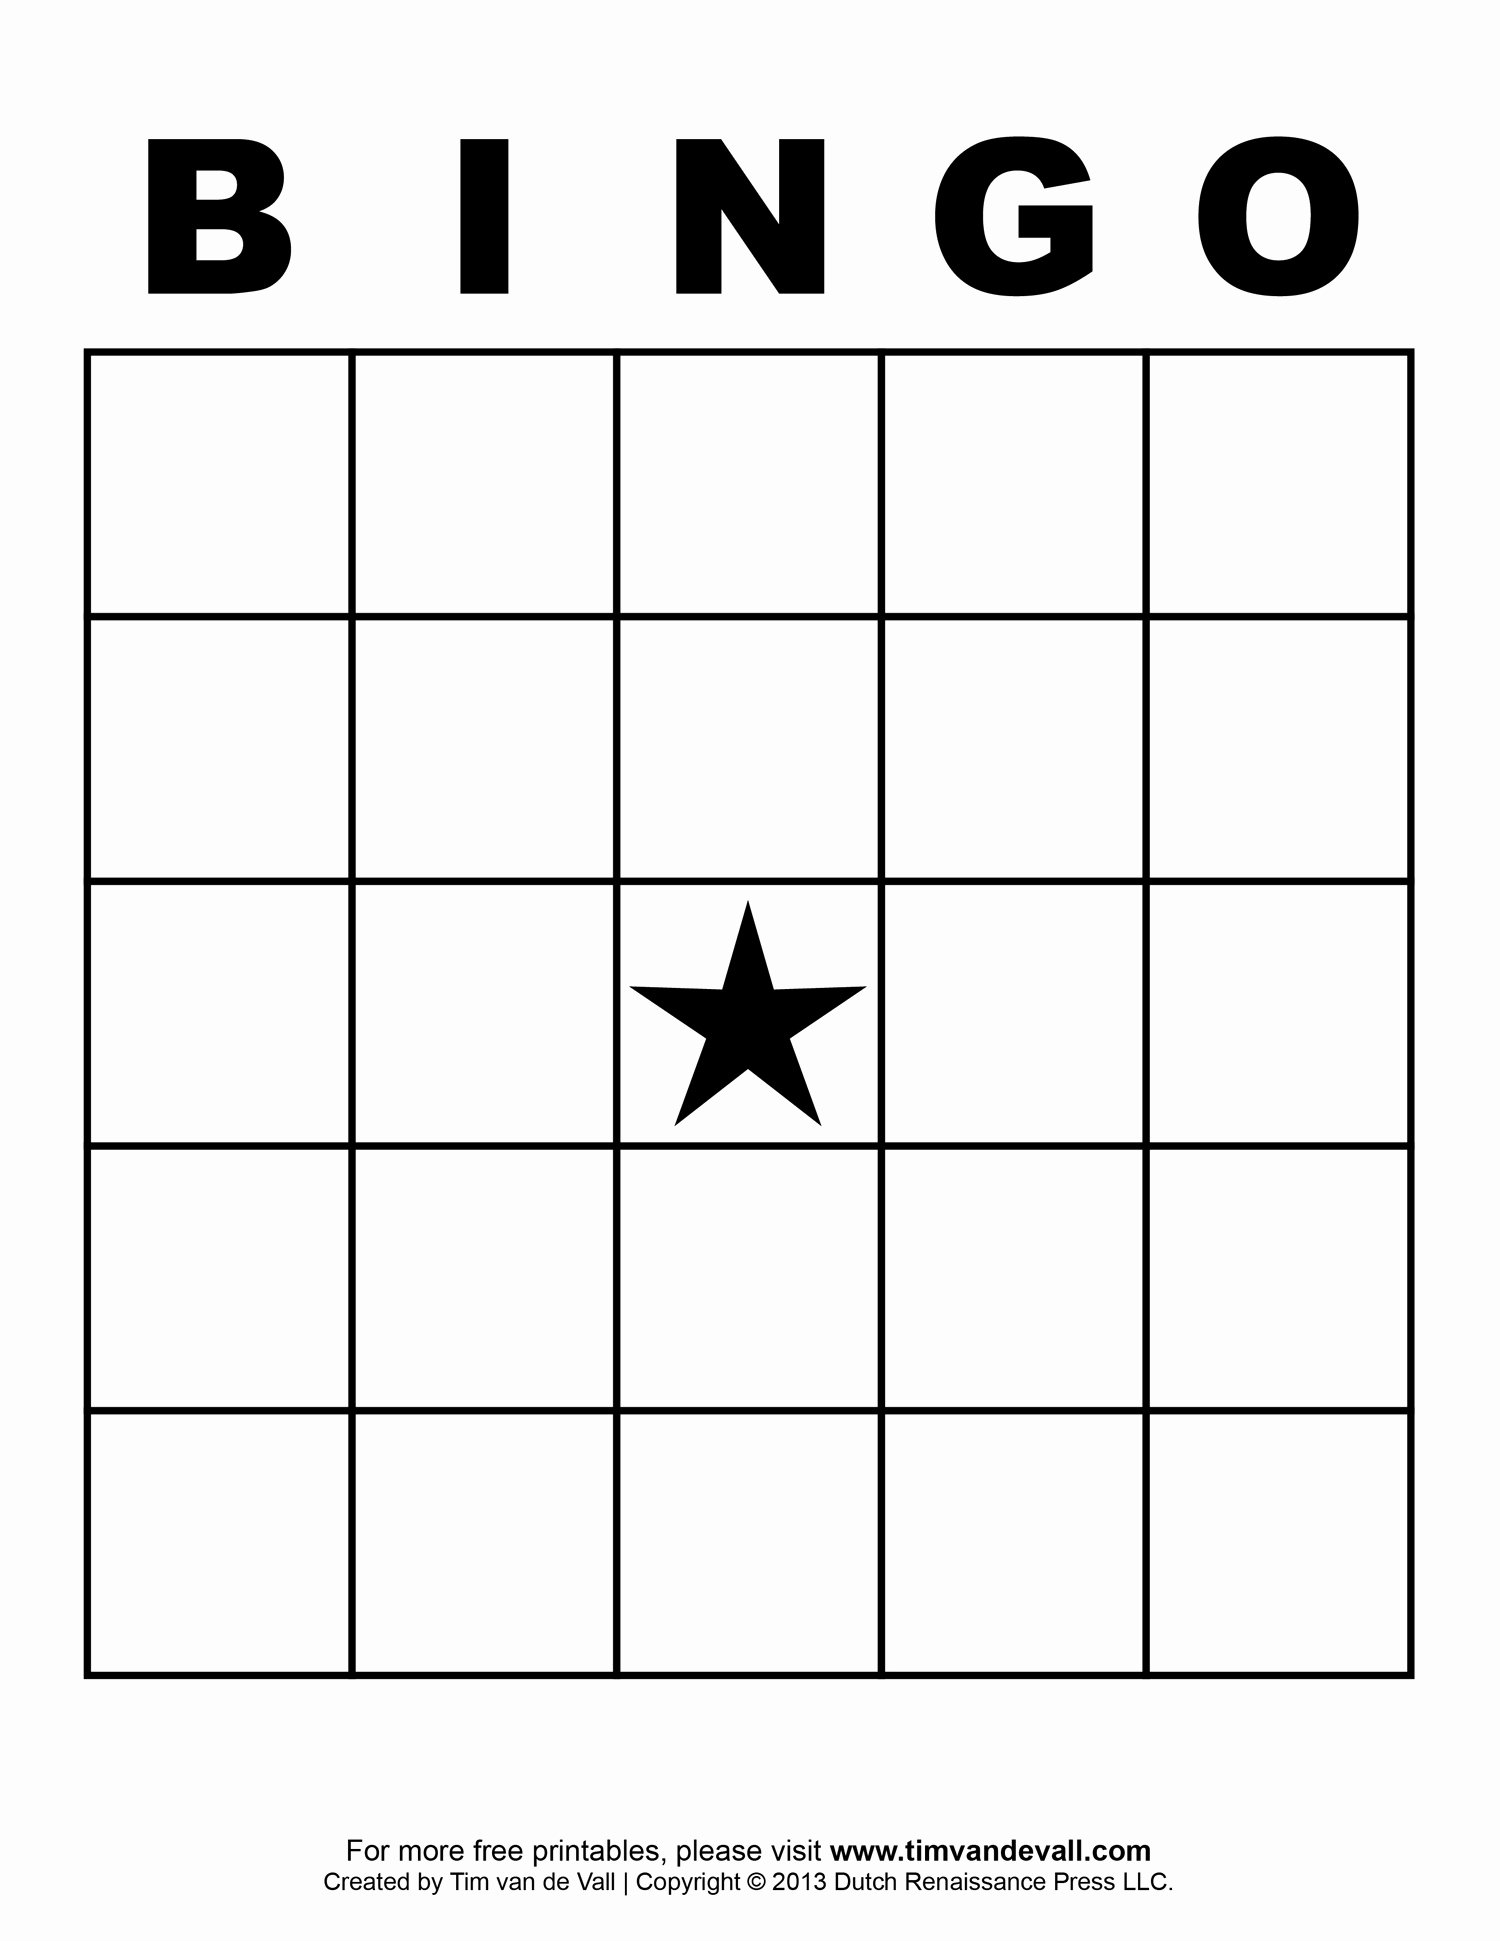 Free Printable Bingo Cards Pdfs with Numbers and tokens